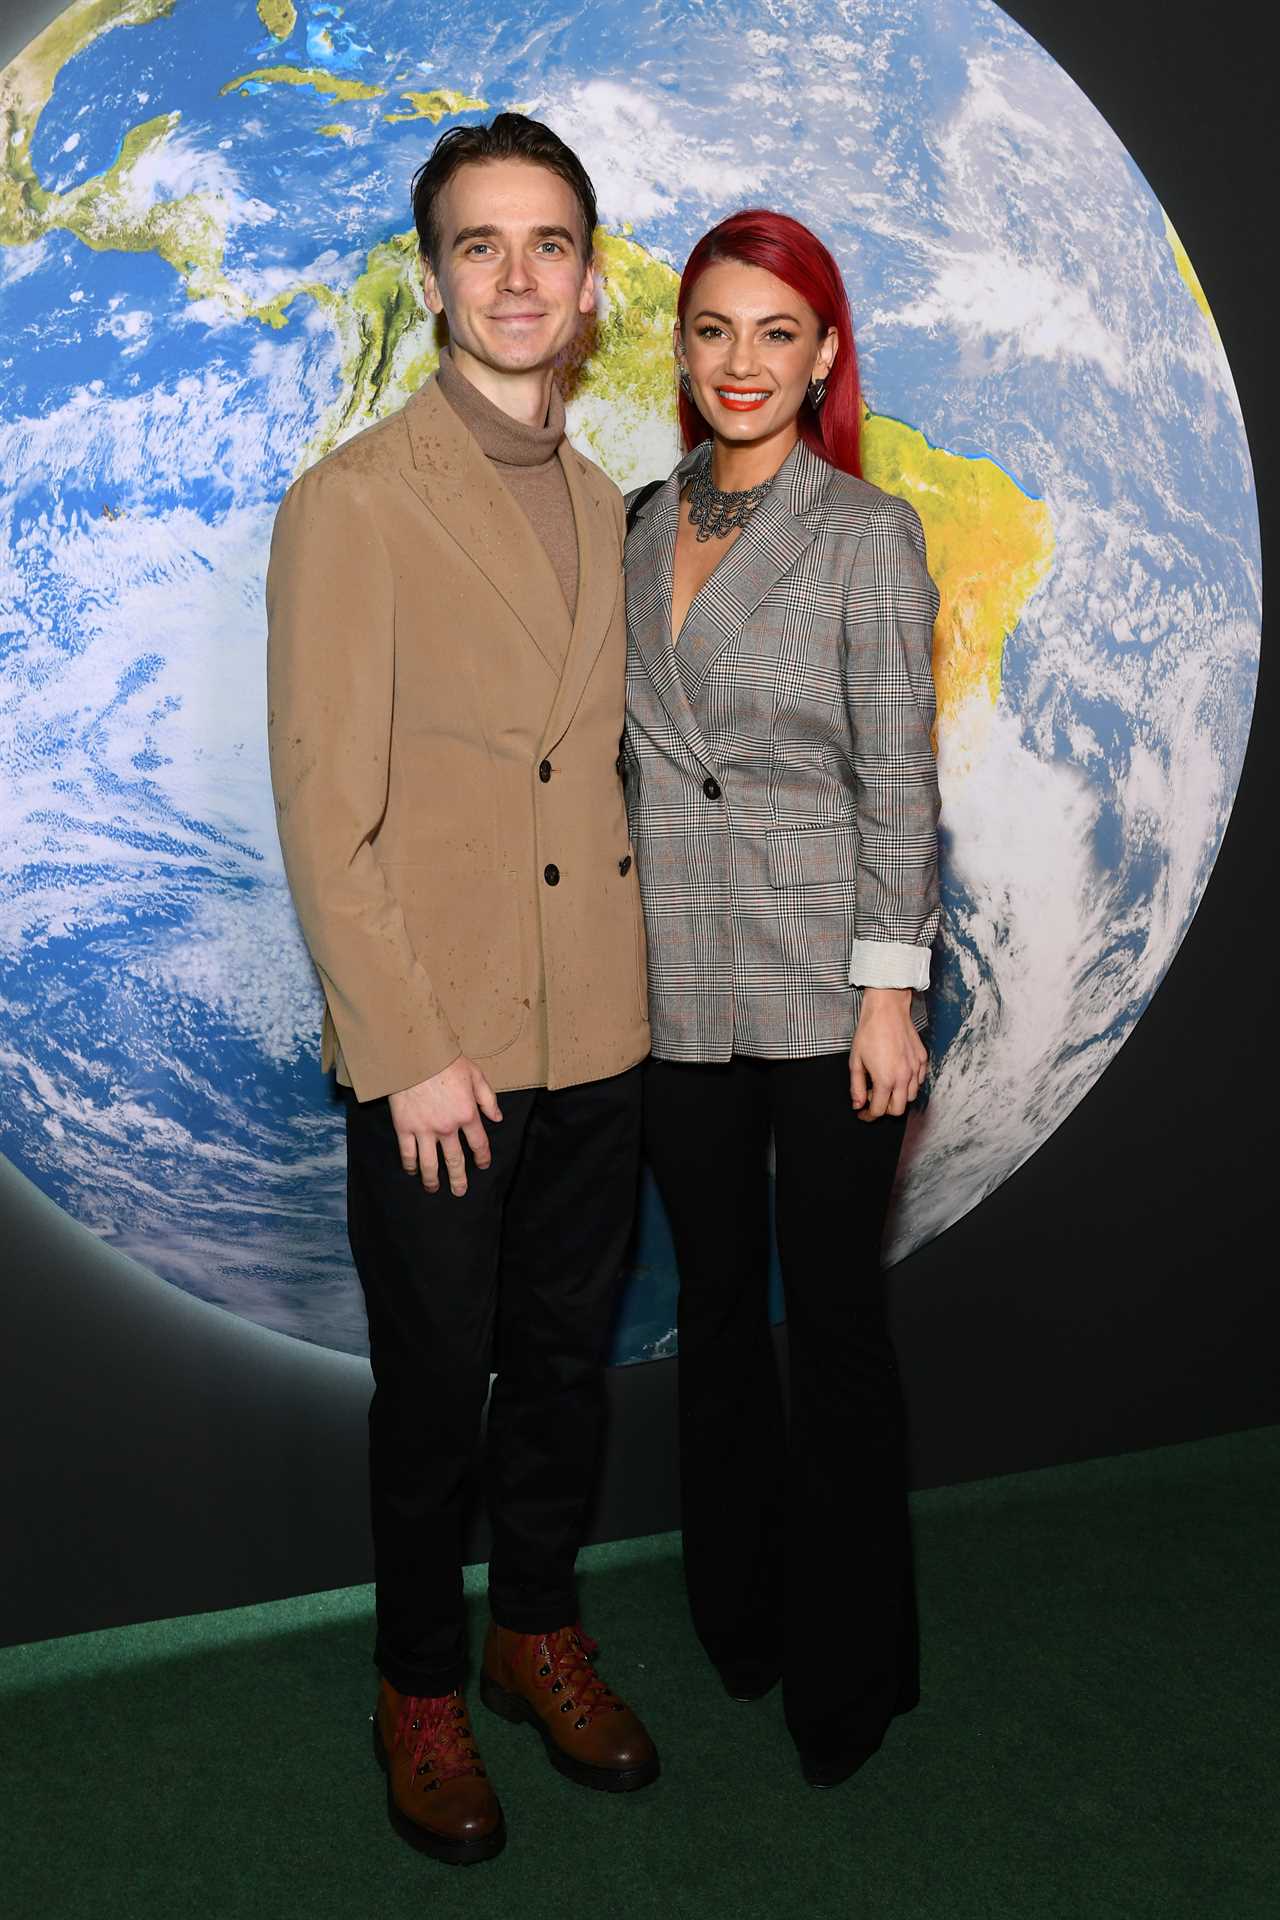 Joe Sugg and Dianne Buswell cosy up at BBC Earth event after split rumours